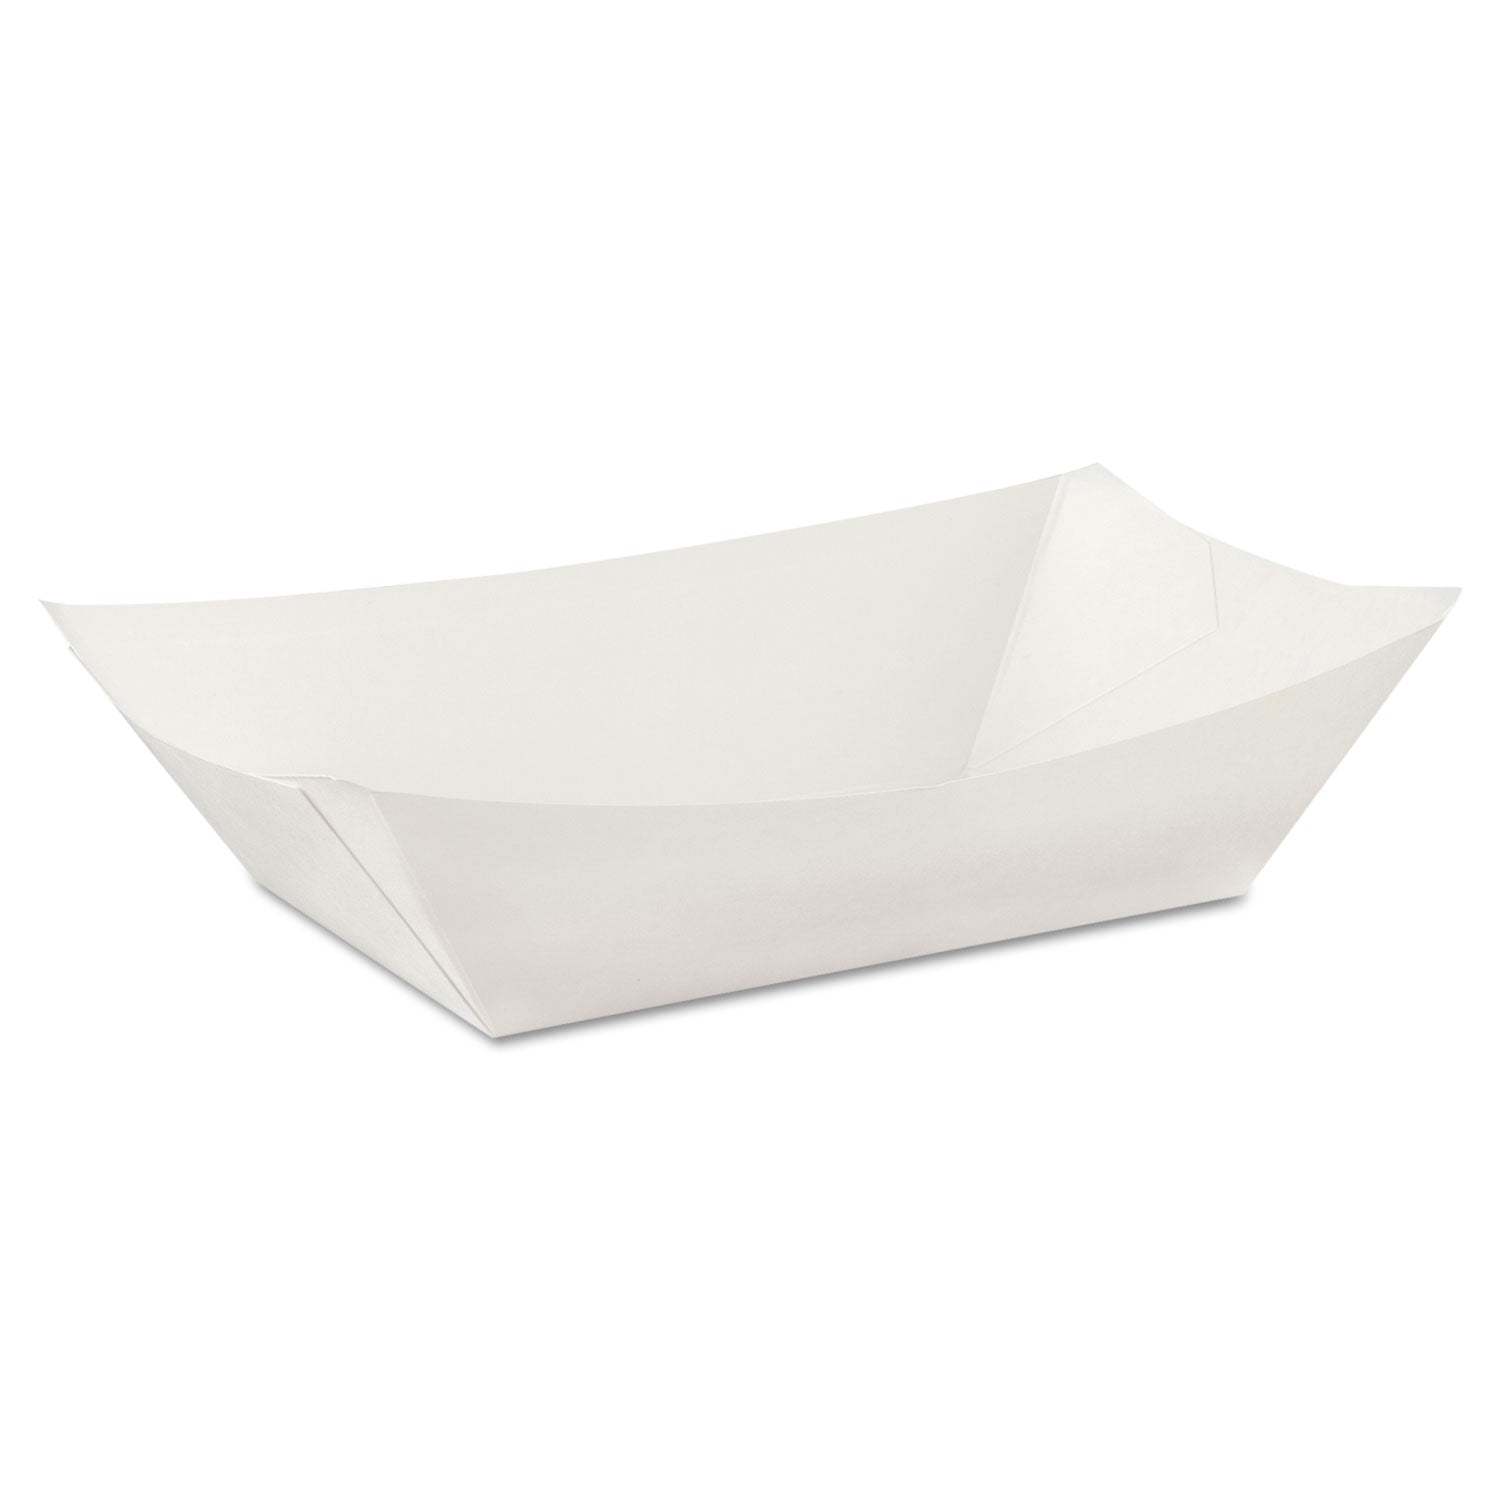 Kant Leek Polycoated Paper Food Tray, 3 lb Capacity, 5.88 x 8.4 x 2, White, 250/Pack, 2/Pack/Carton - 